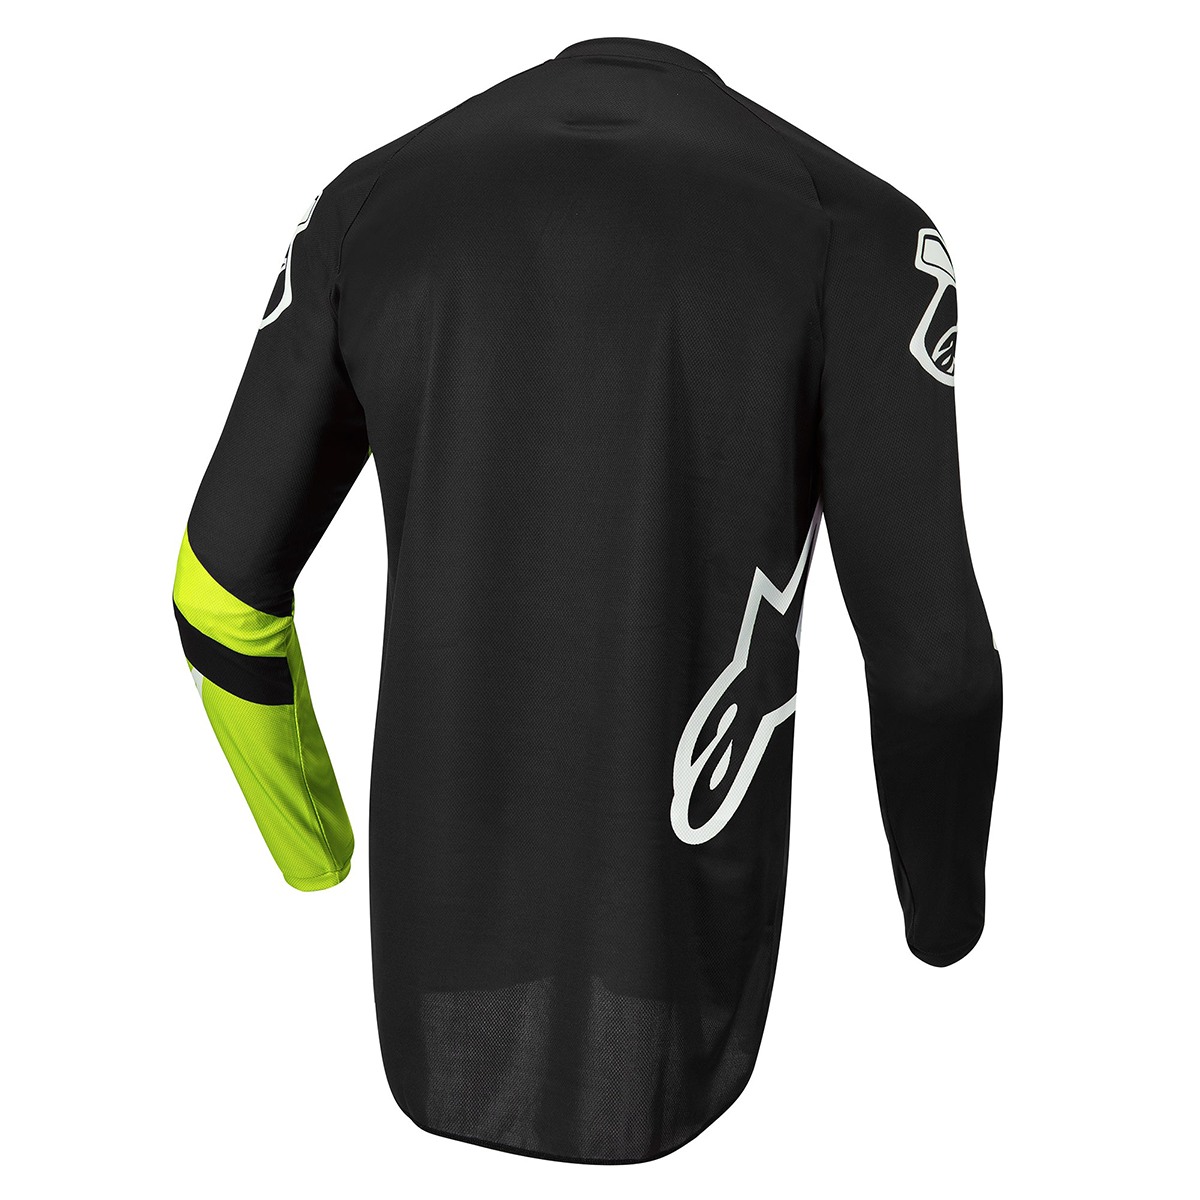 Alpinestars Racer Chaser Youth Jersey